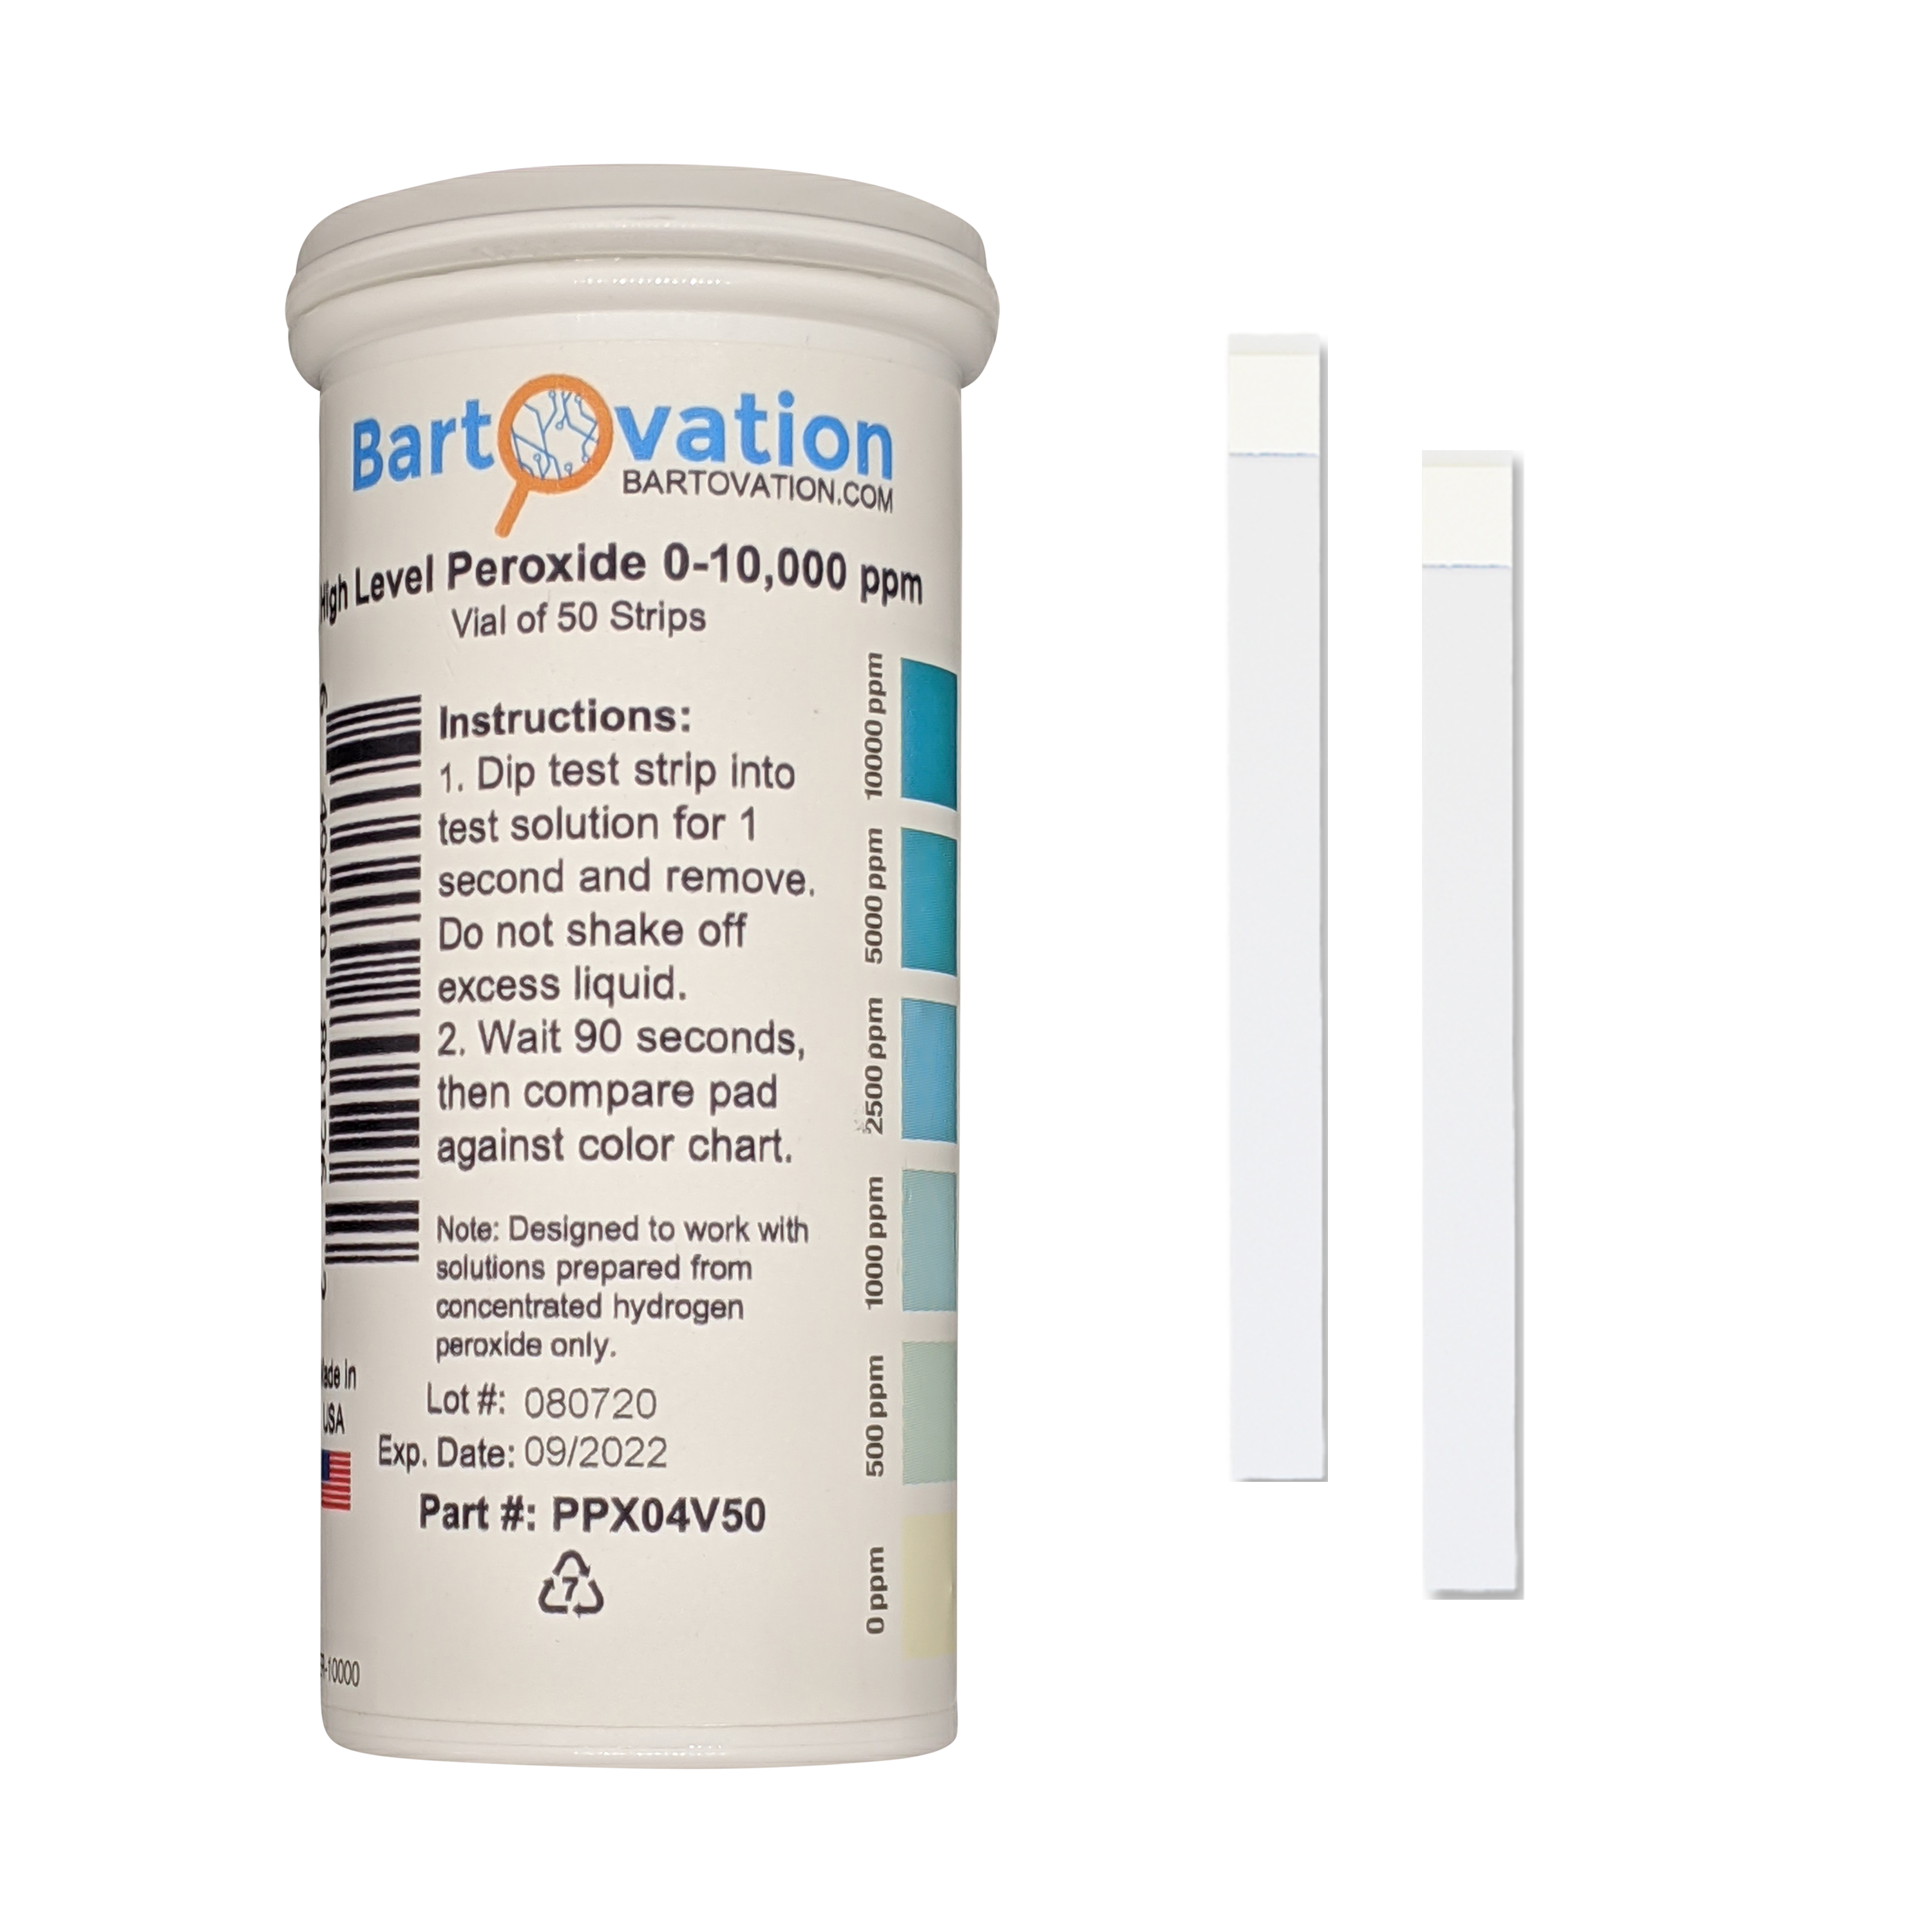 Very High Level Peroxide H2O2 Test Strips, 0-10,000 ppm [Vial of 50 Strips] | Bartovation Test Strips